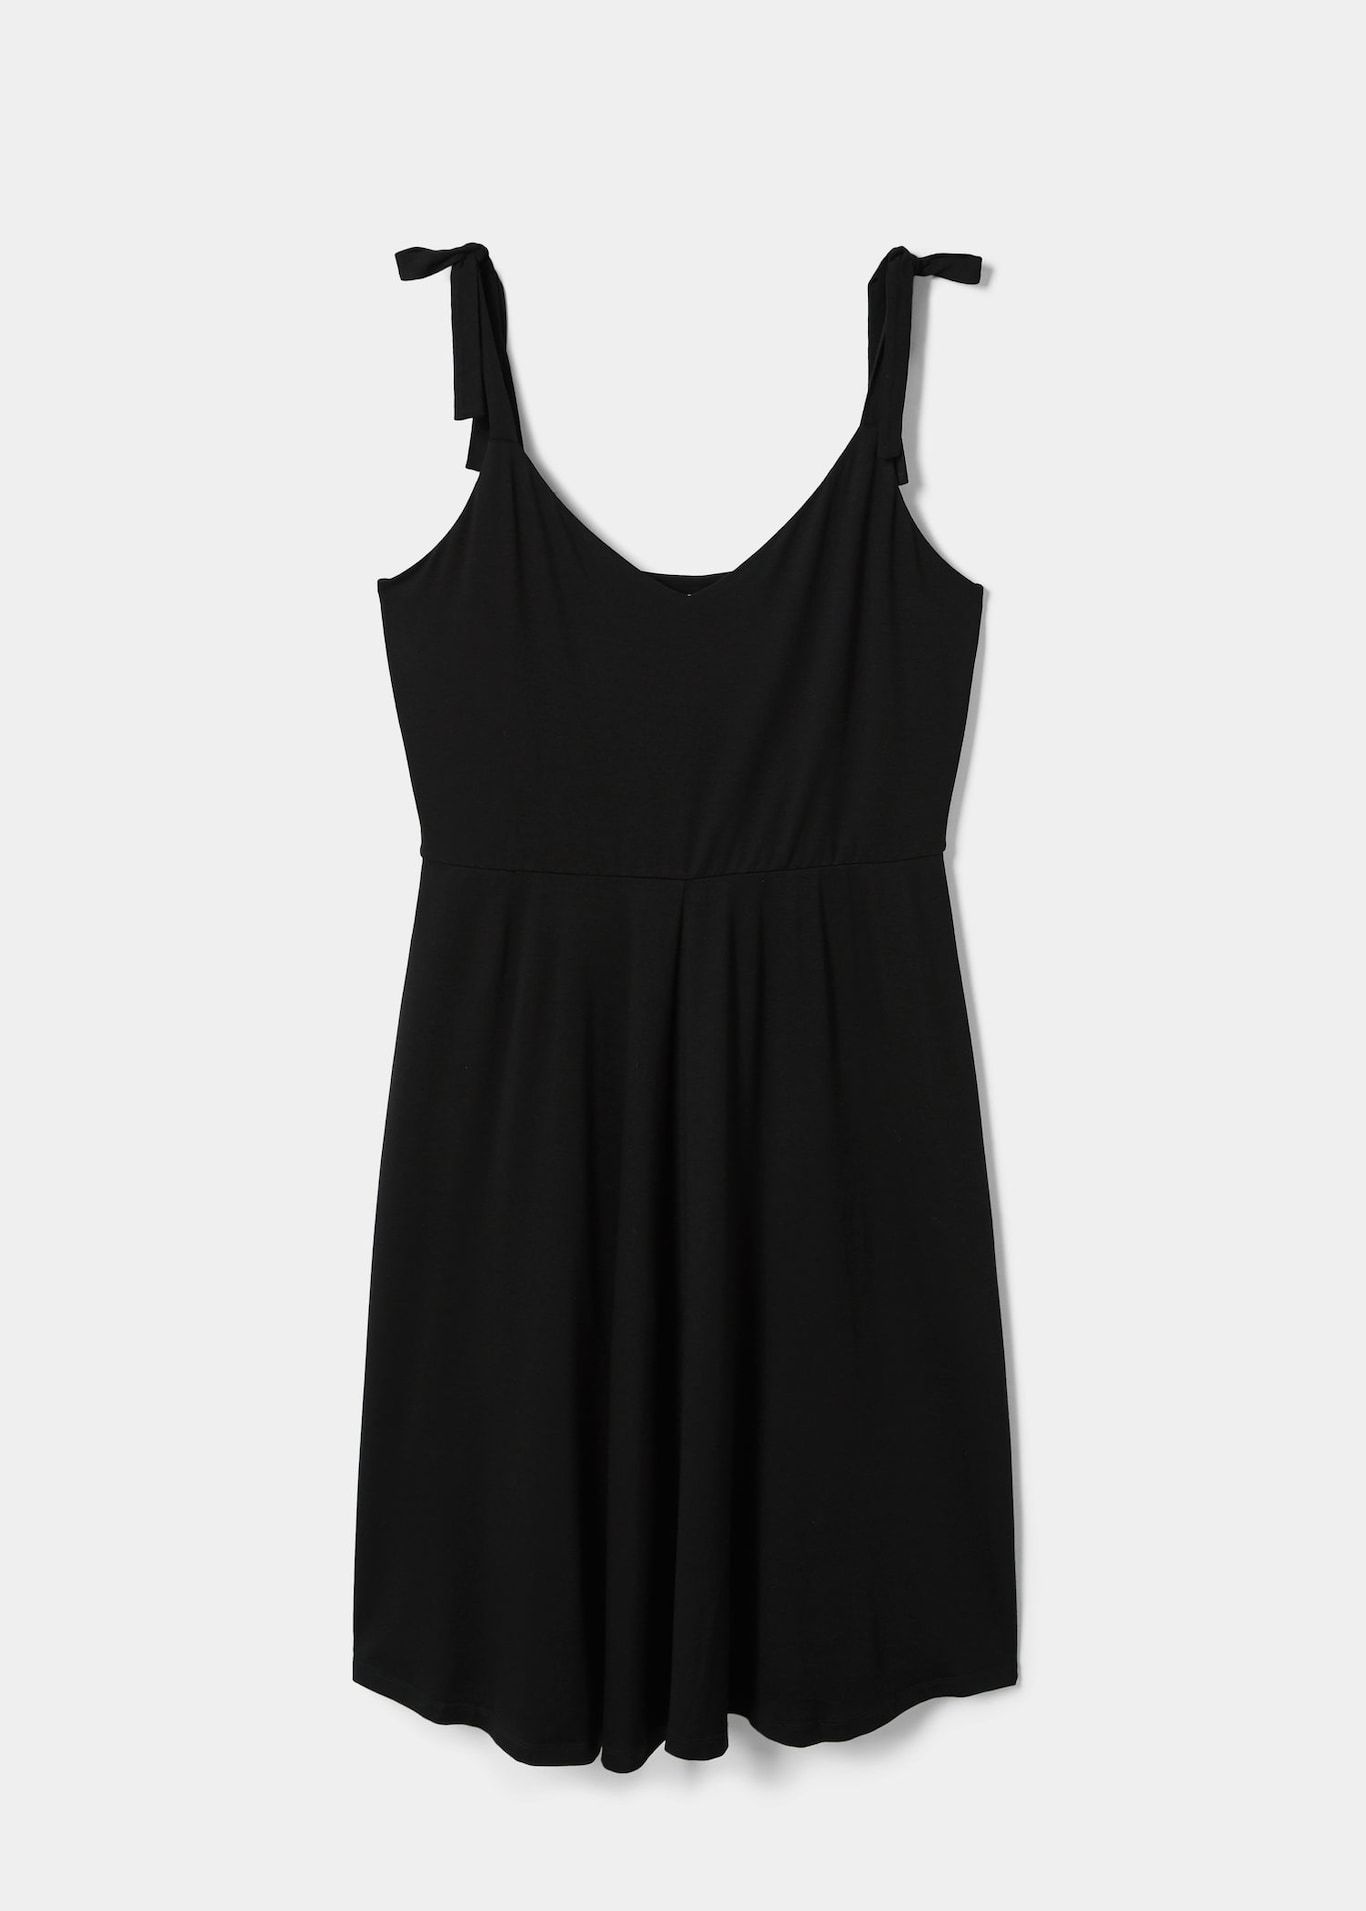 These New Year's Black Dresses Will Never Go Out of Style | Who What Wear